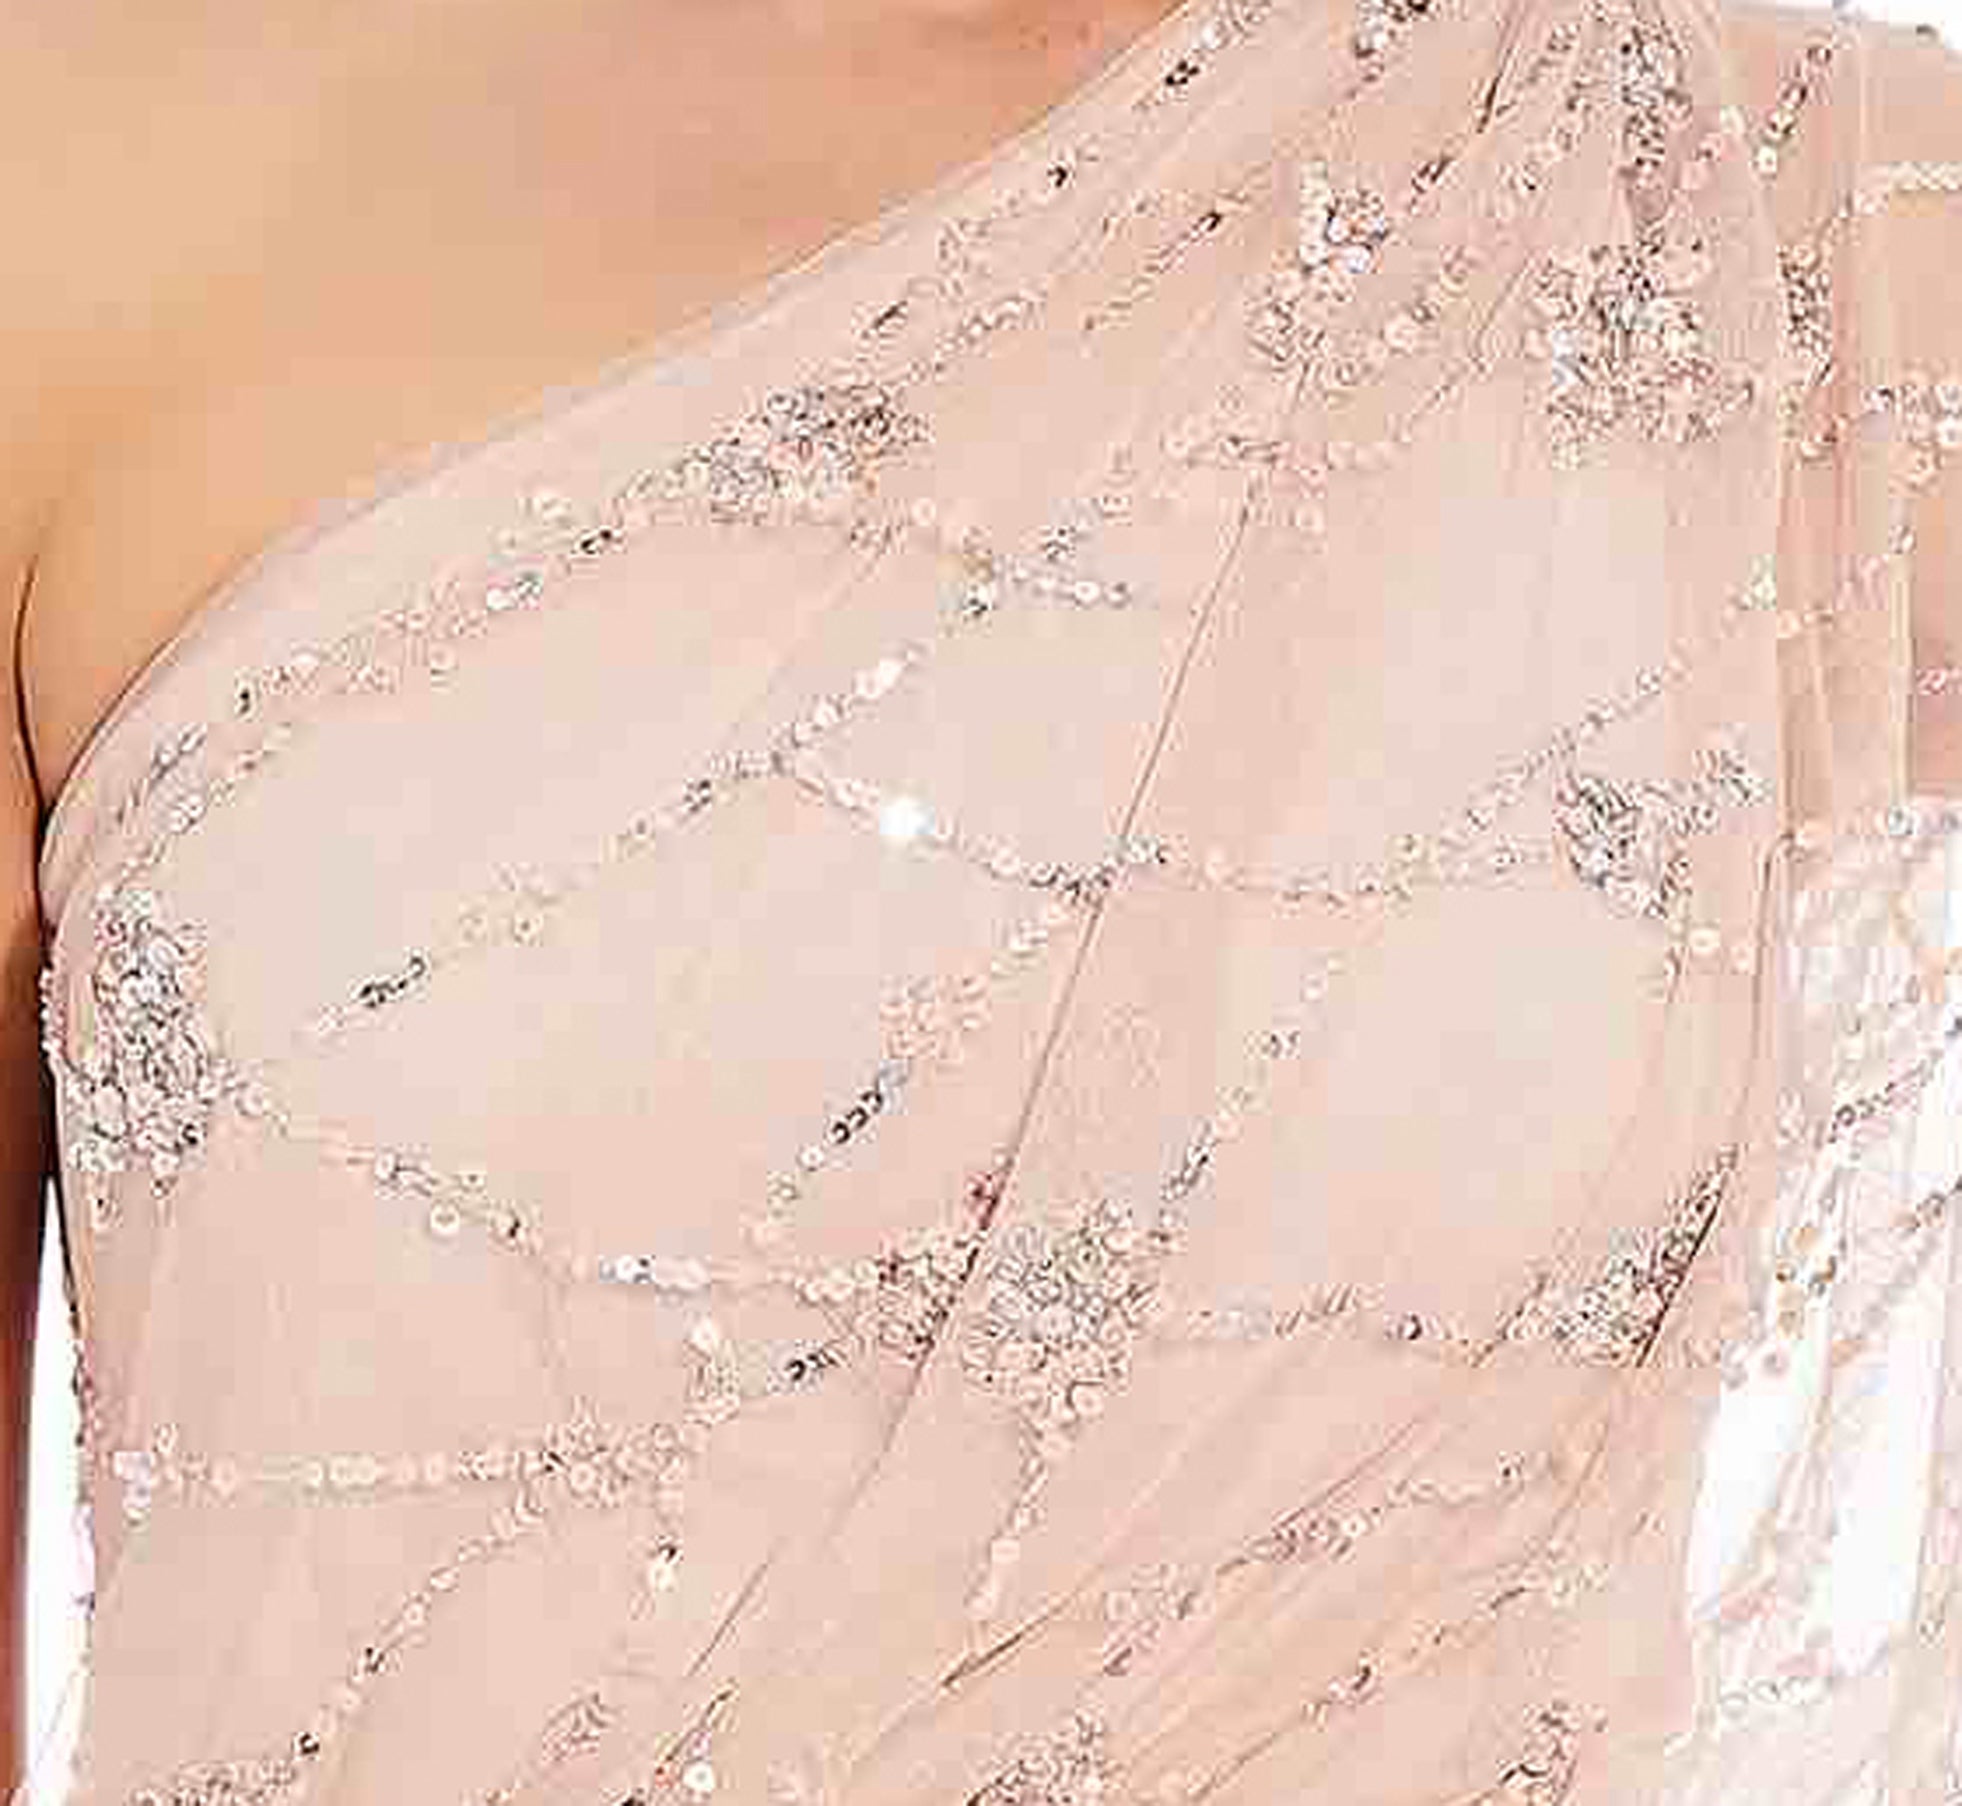 One Shoulder Beaded Gown In Blush | Adrianna Papell